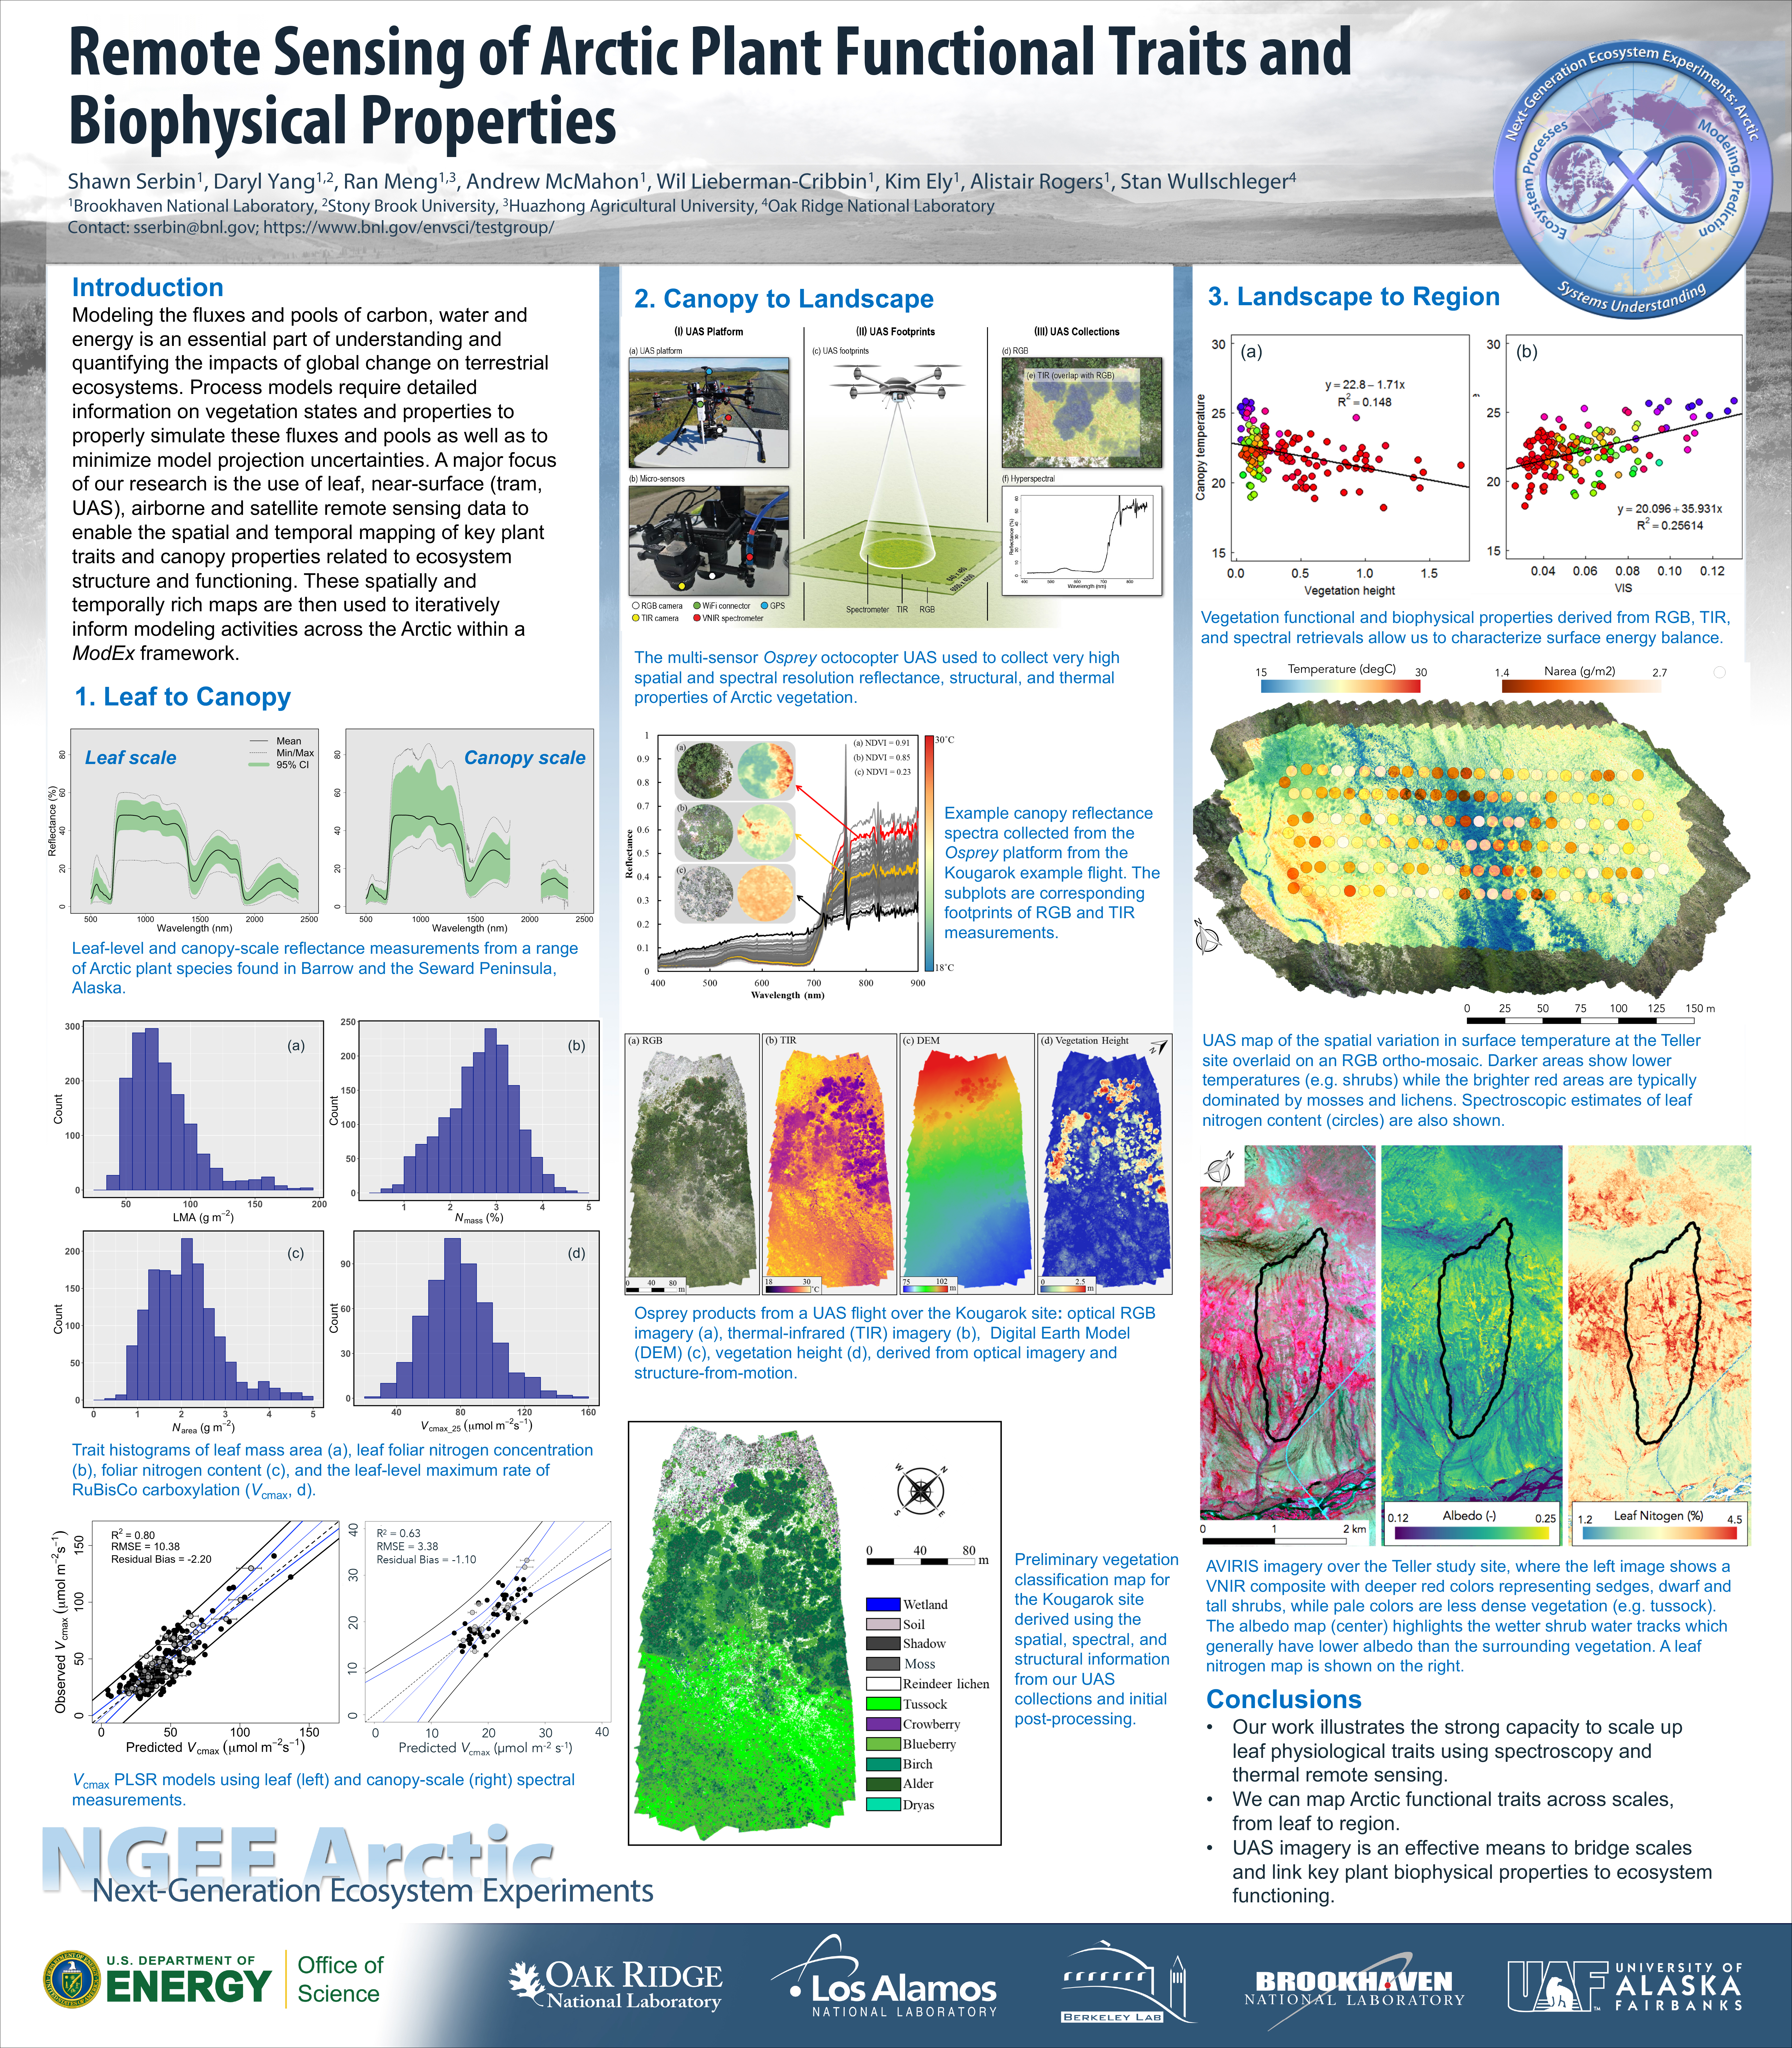 Remote Sensing of Arctic Plant Functional Traits and Biophysical Properties poster